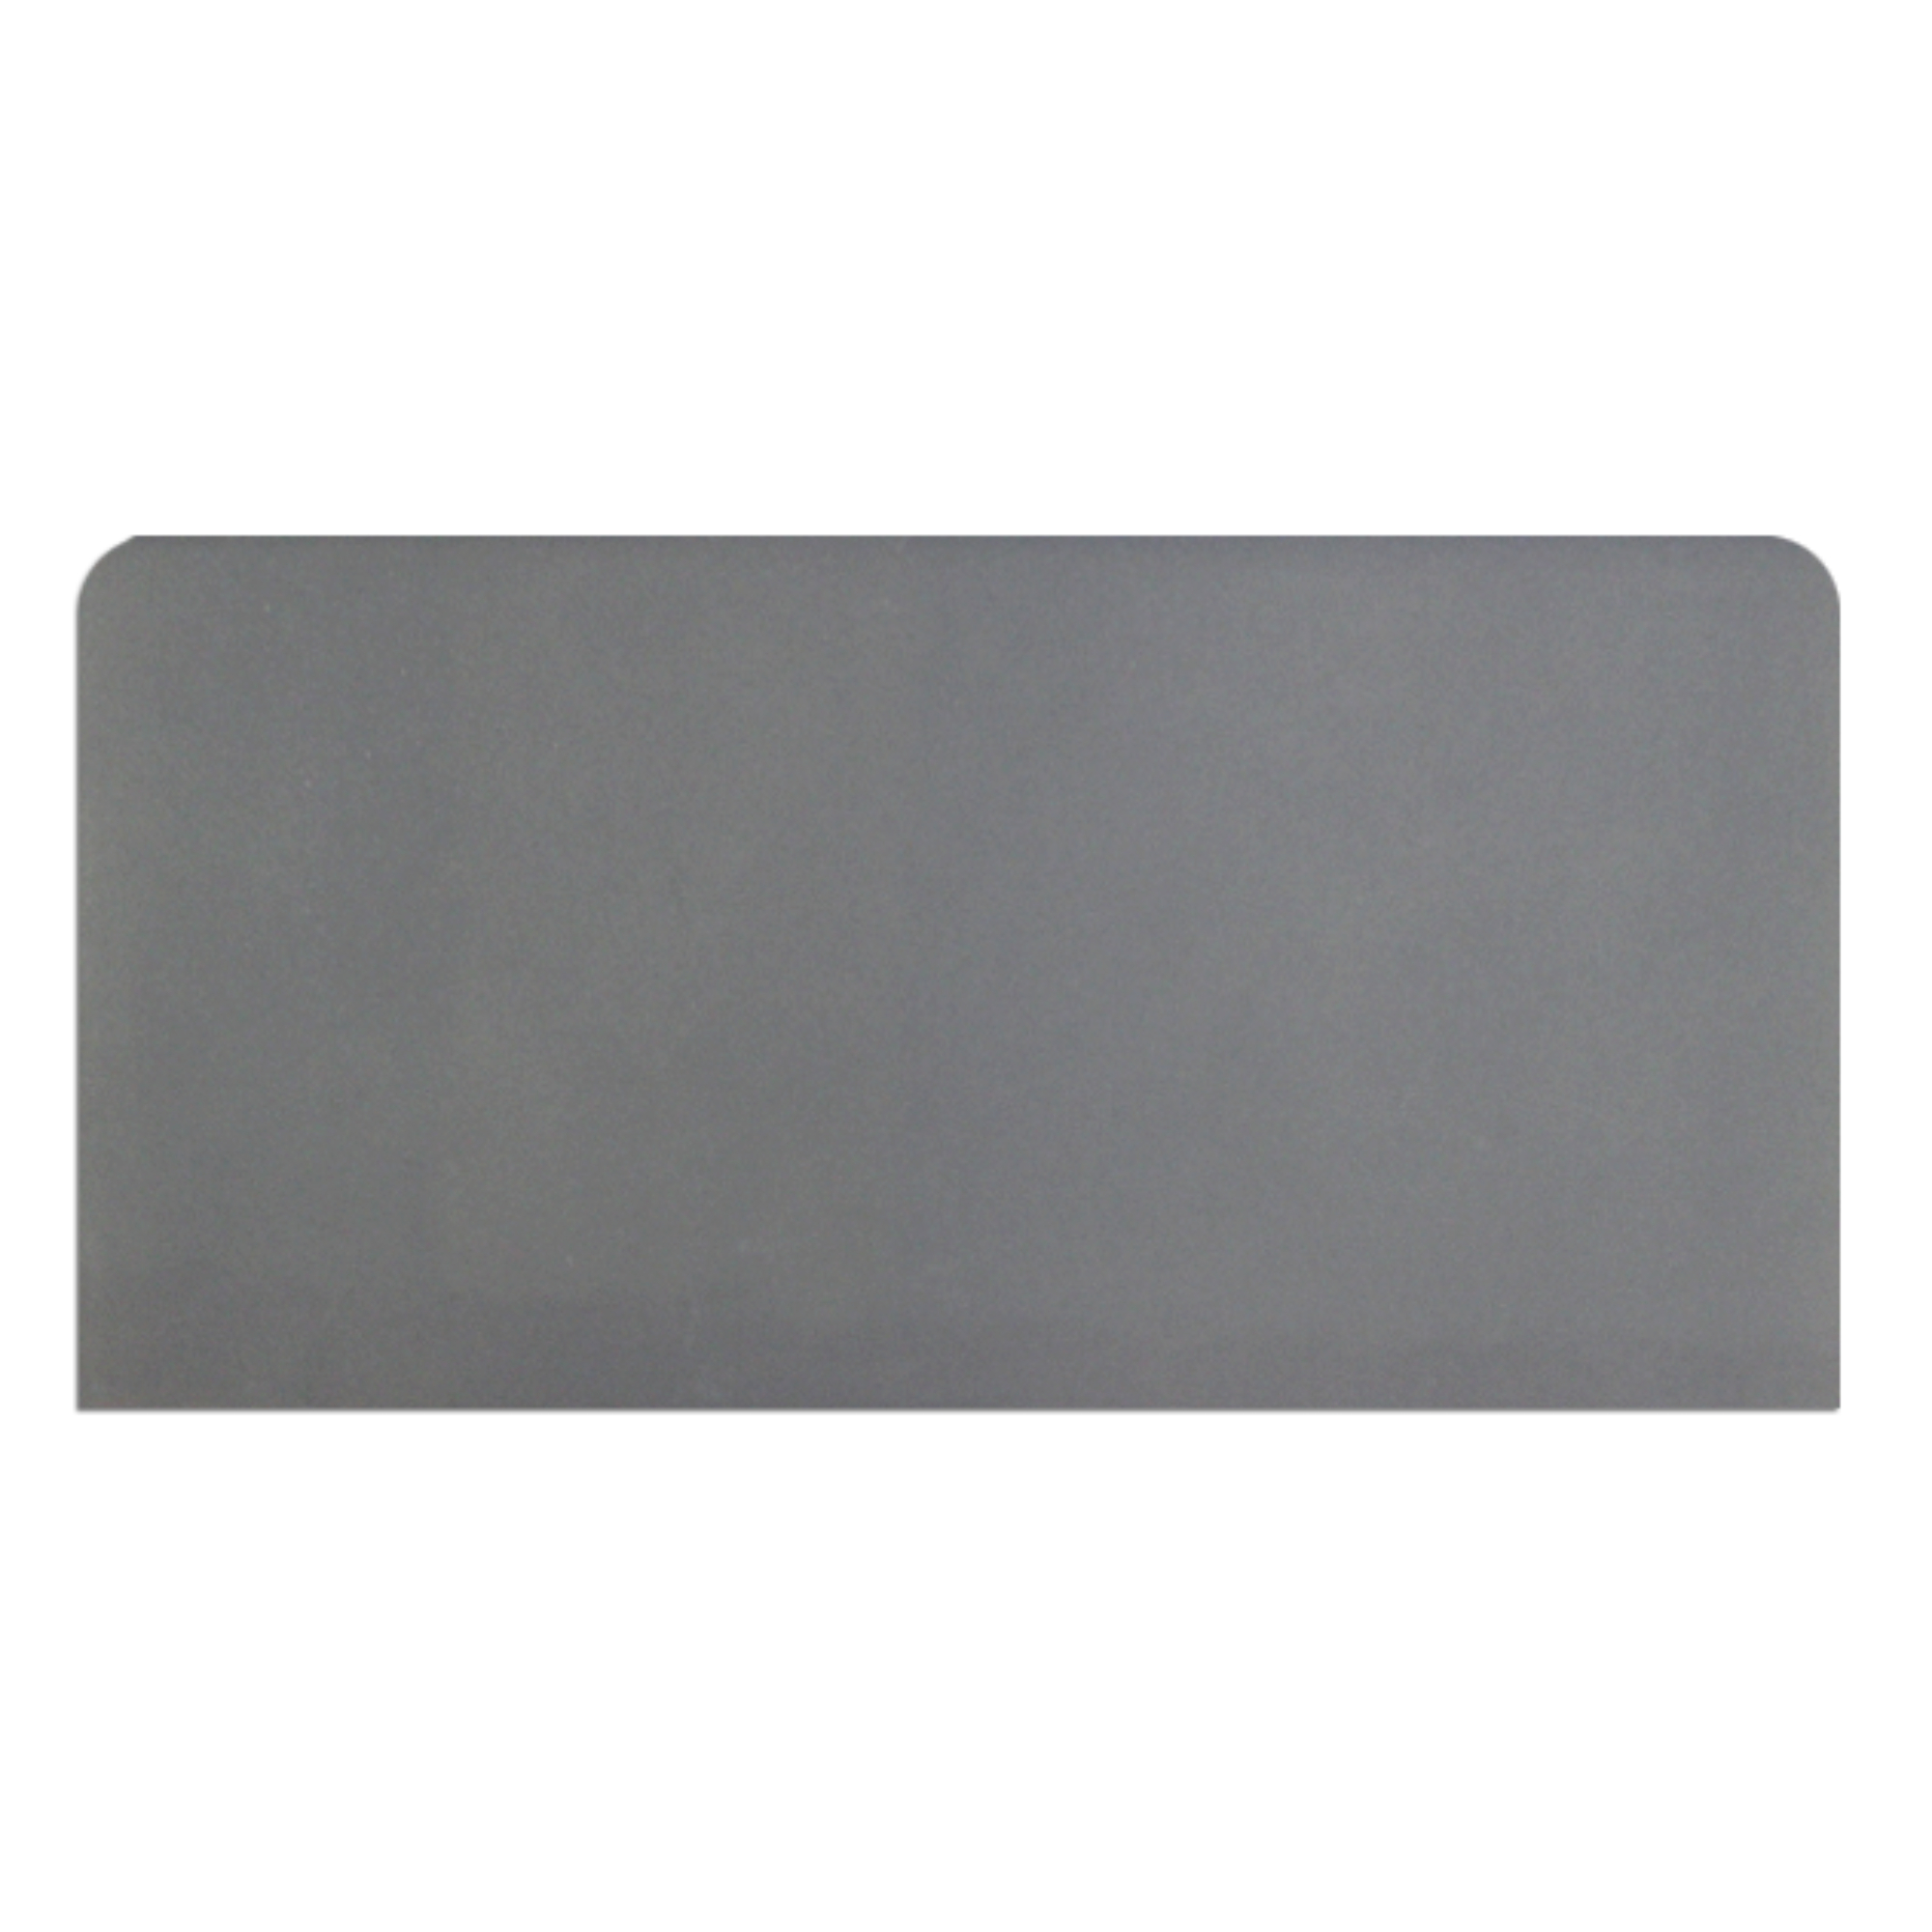 Imperial Pewter Gls 10x20 REL